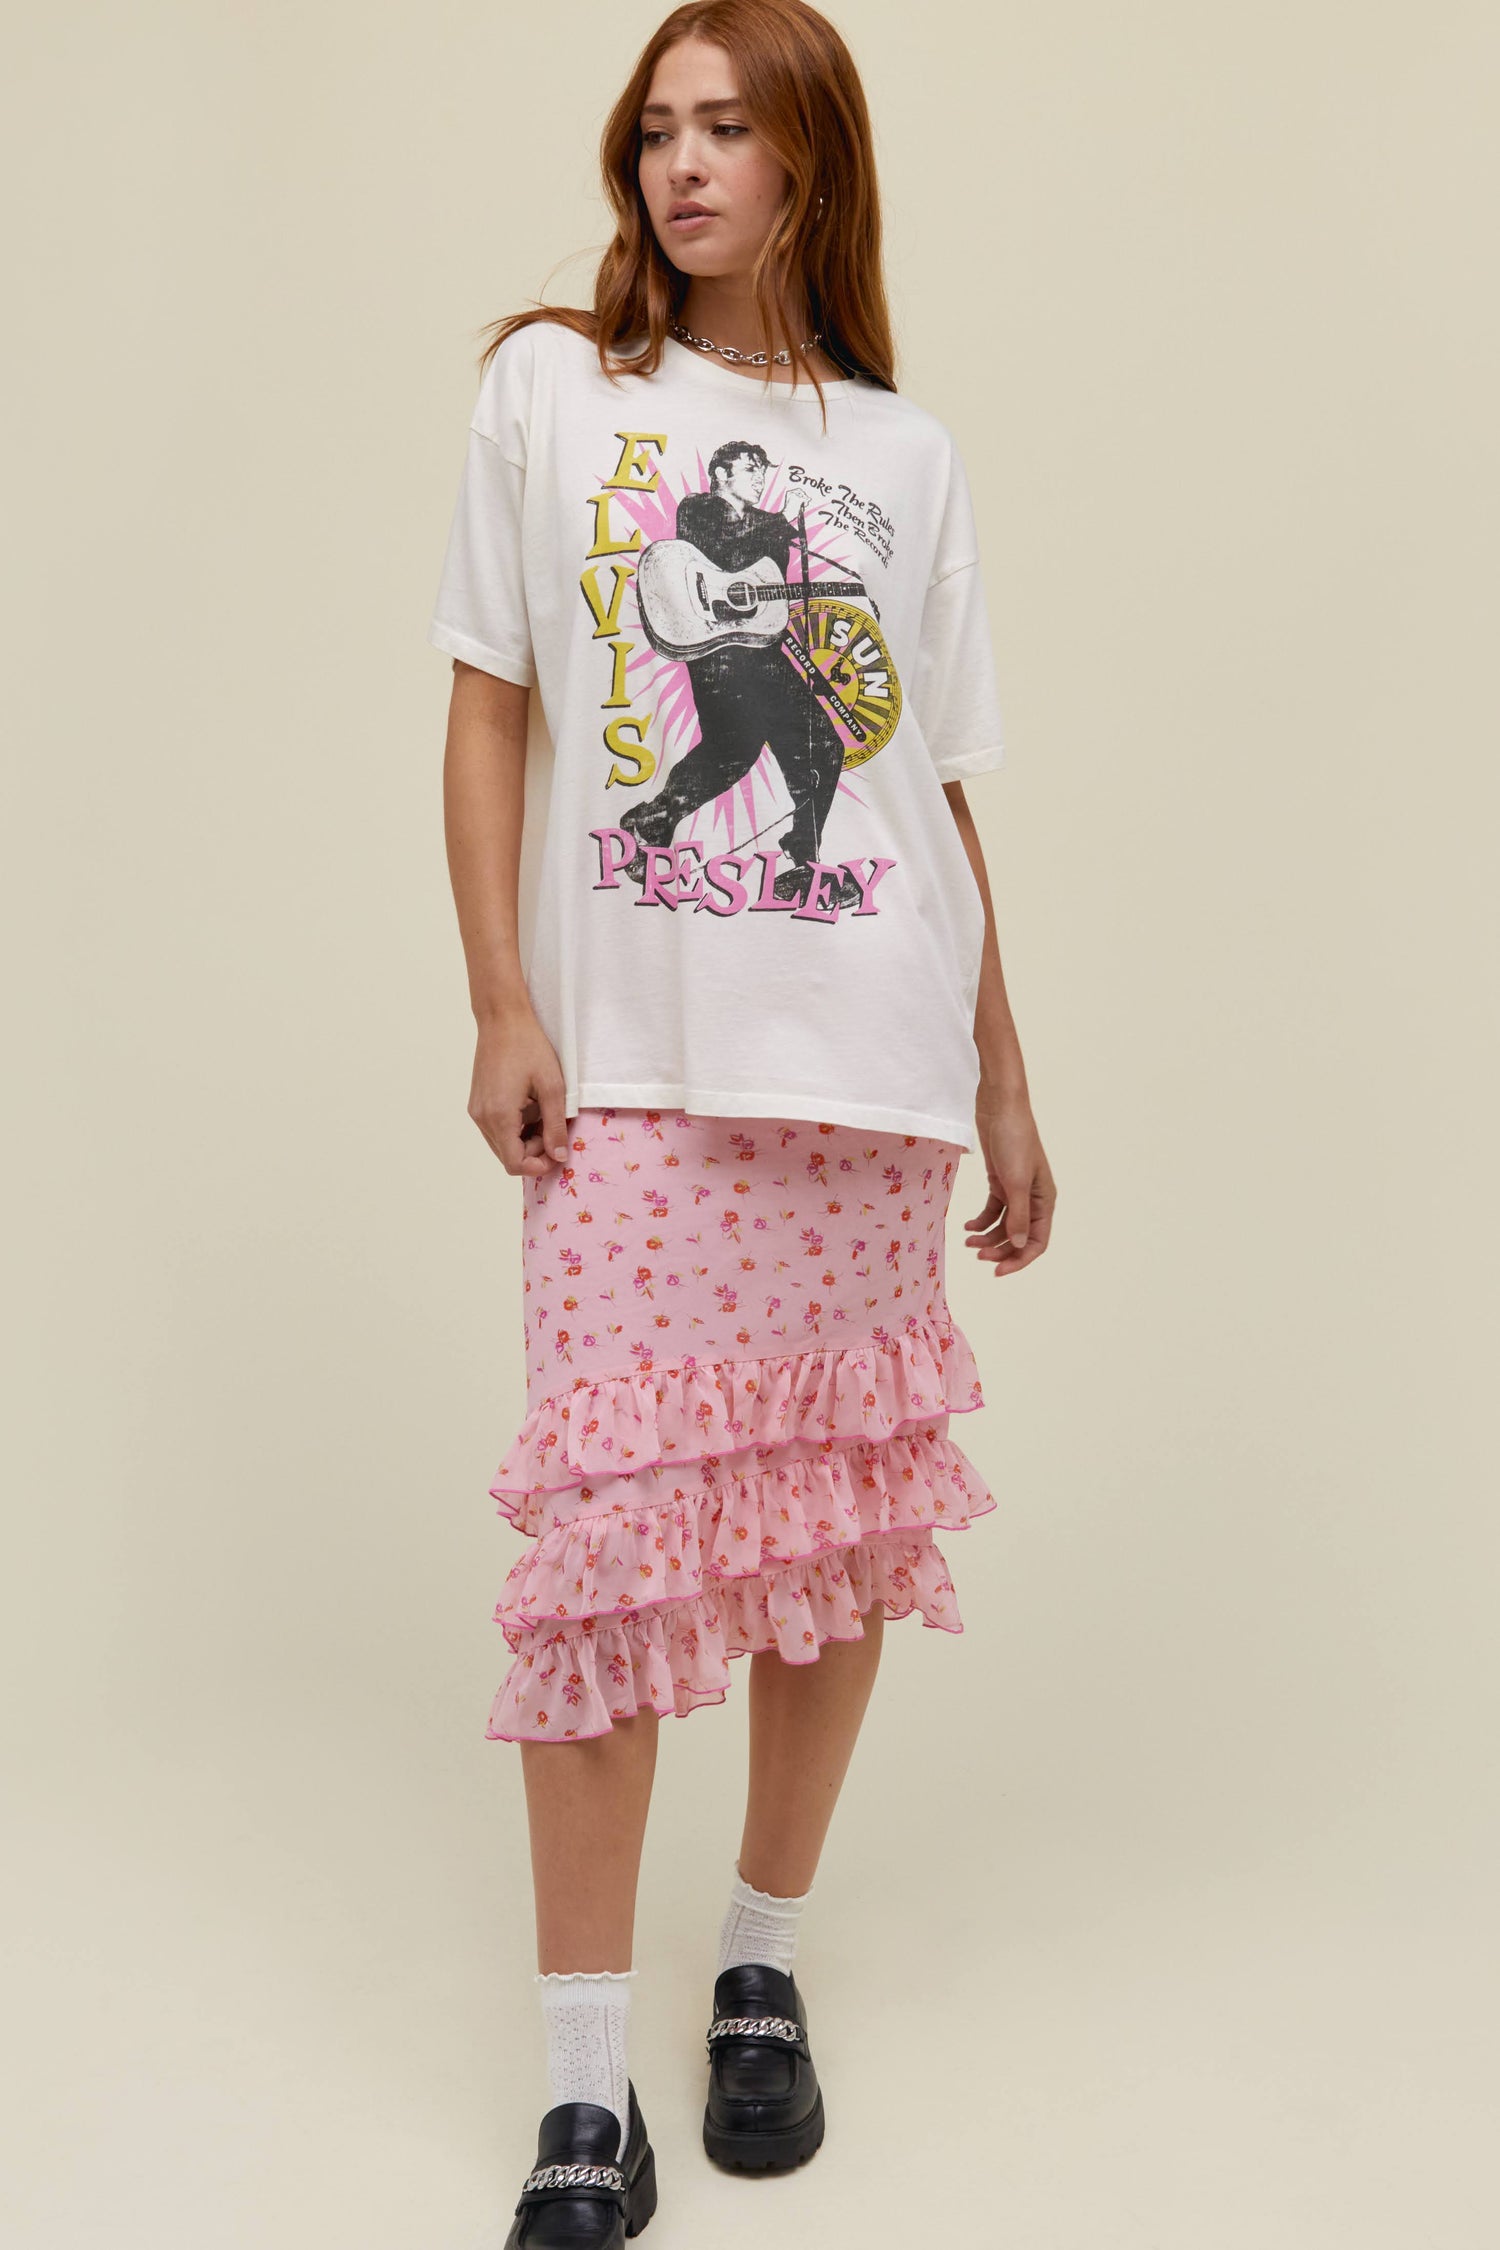 A straight-haired model featuring a white tee stamped with 'Elvis Presley' and an Iconic portrait of the asking.